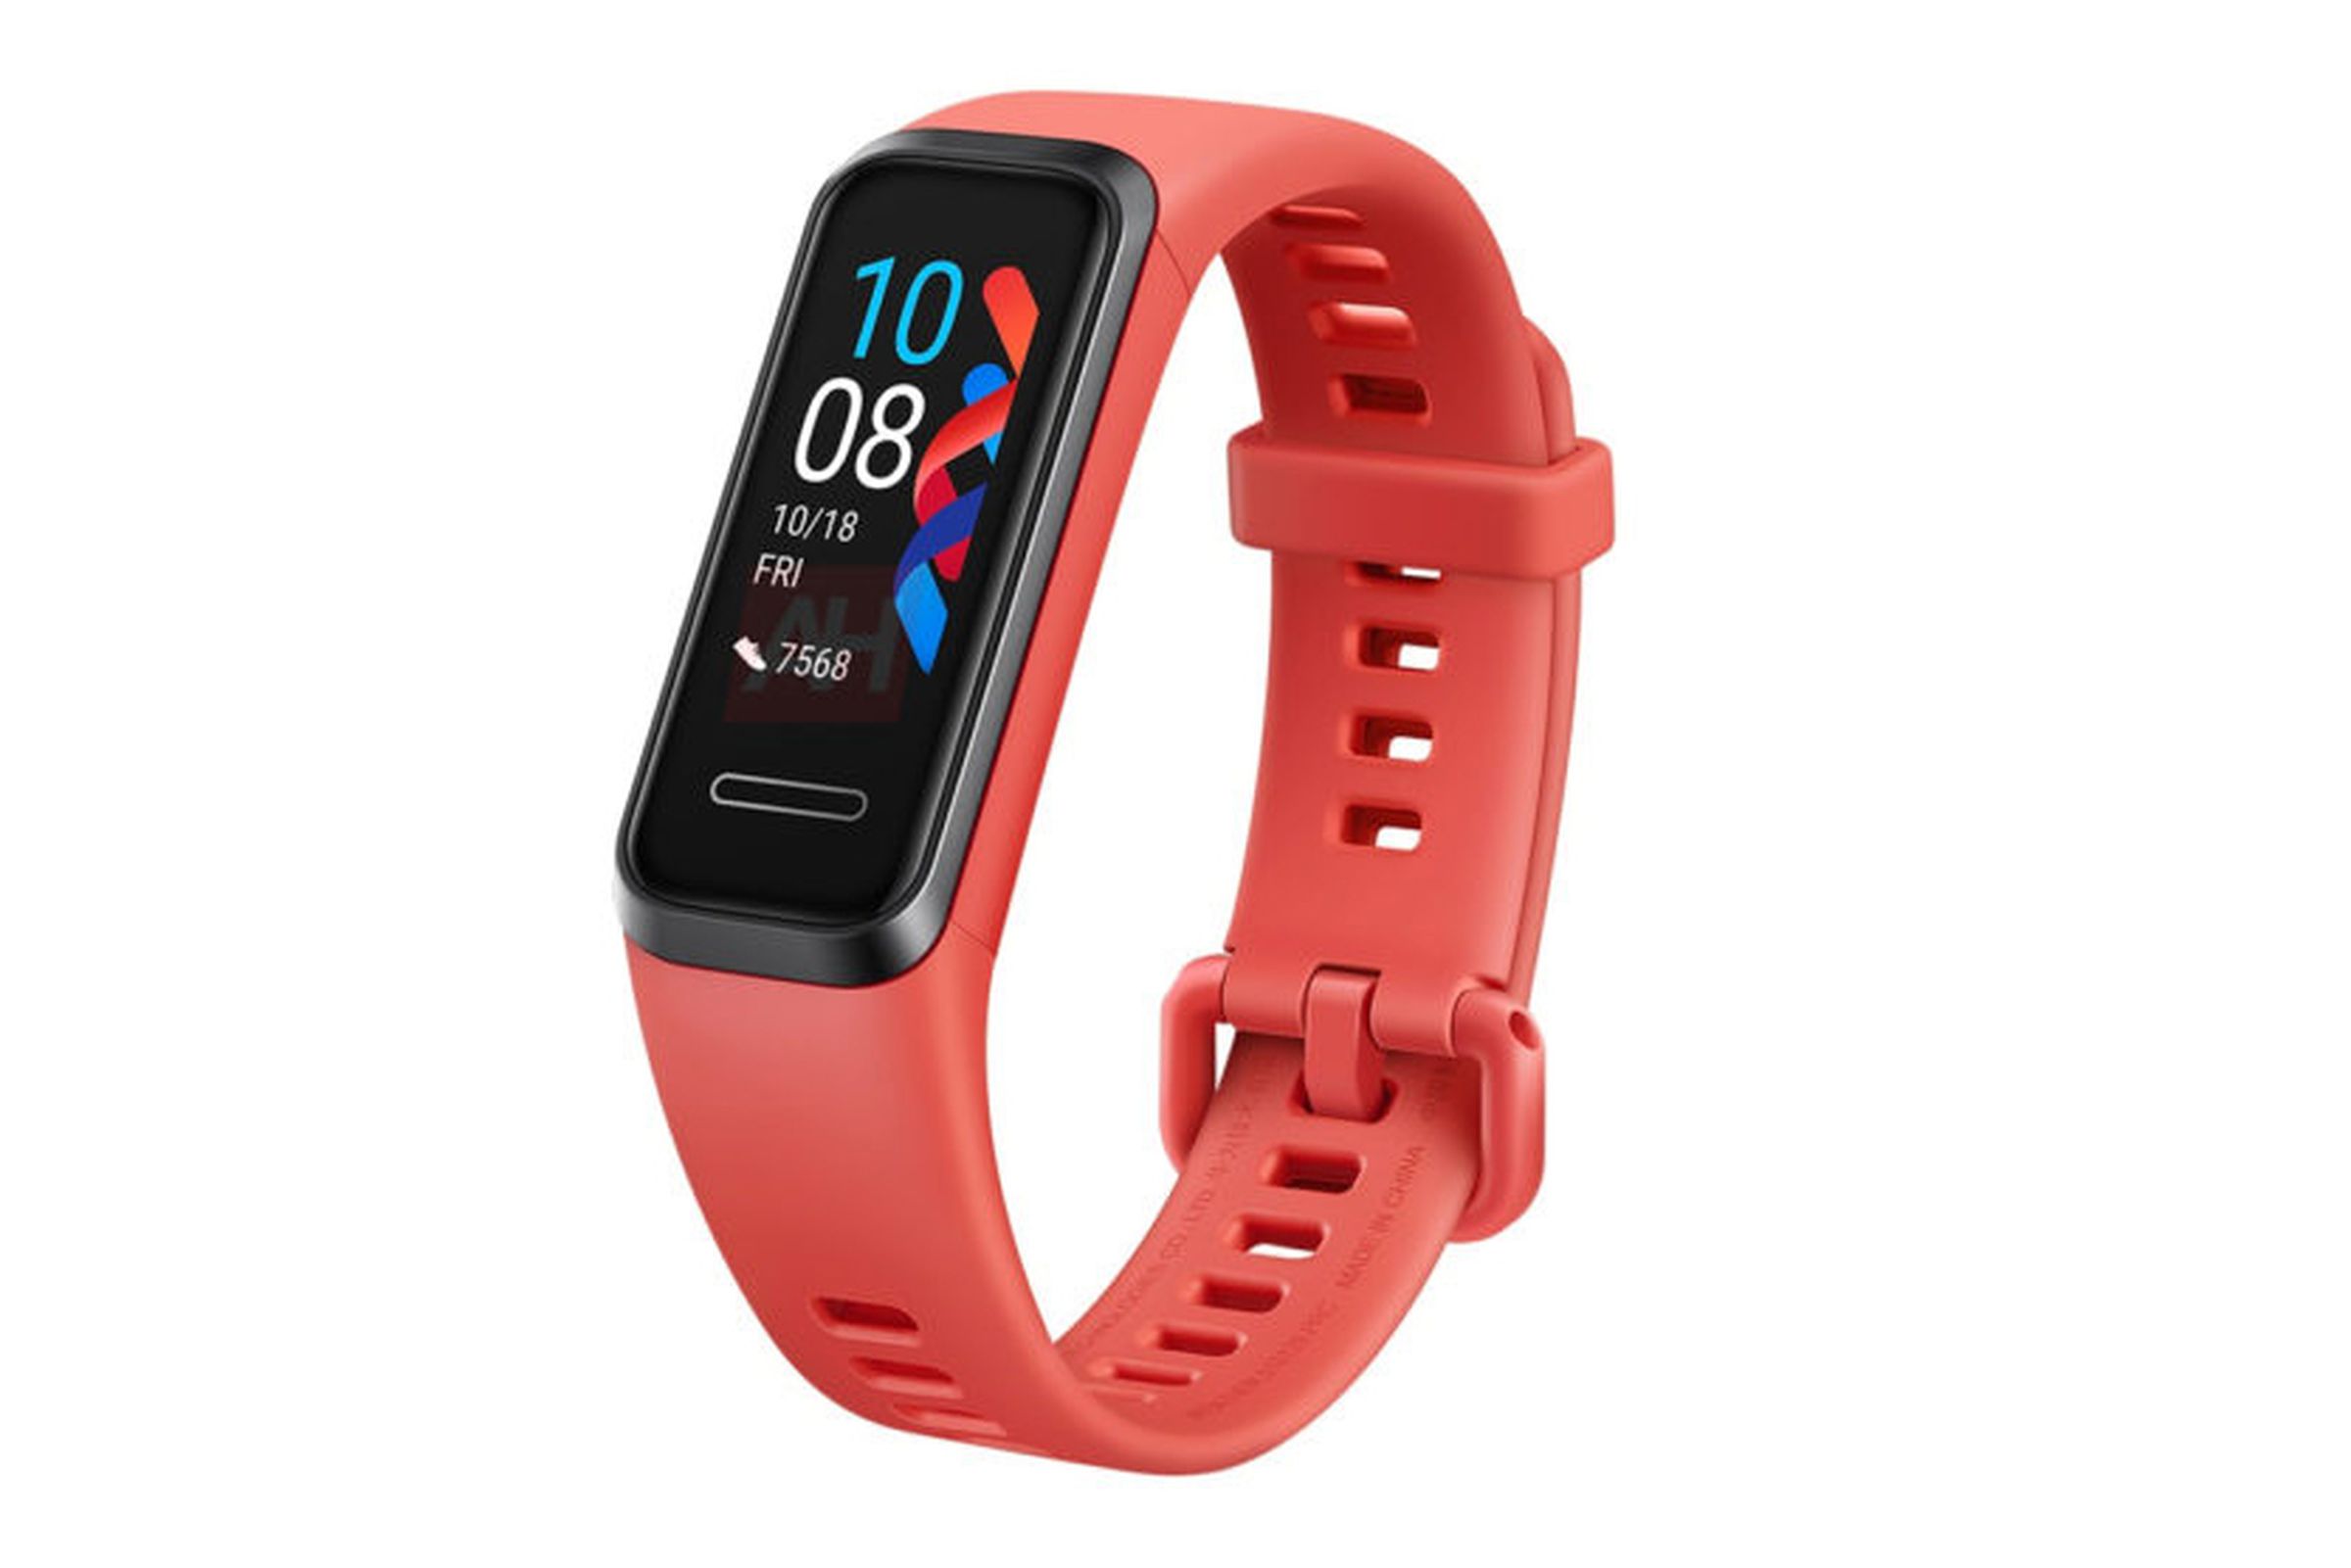 The new fitness band will be equipped with GPS and a heart-rate sensor.